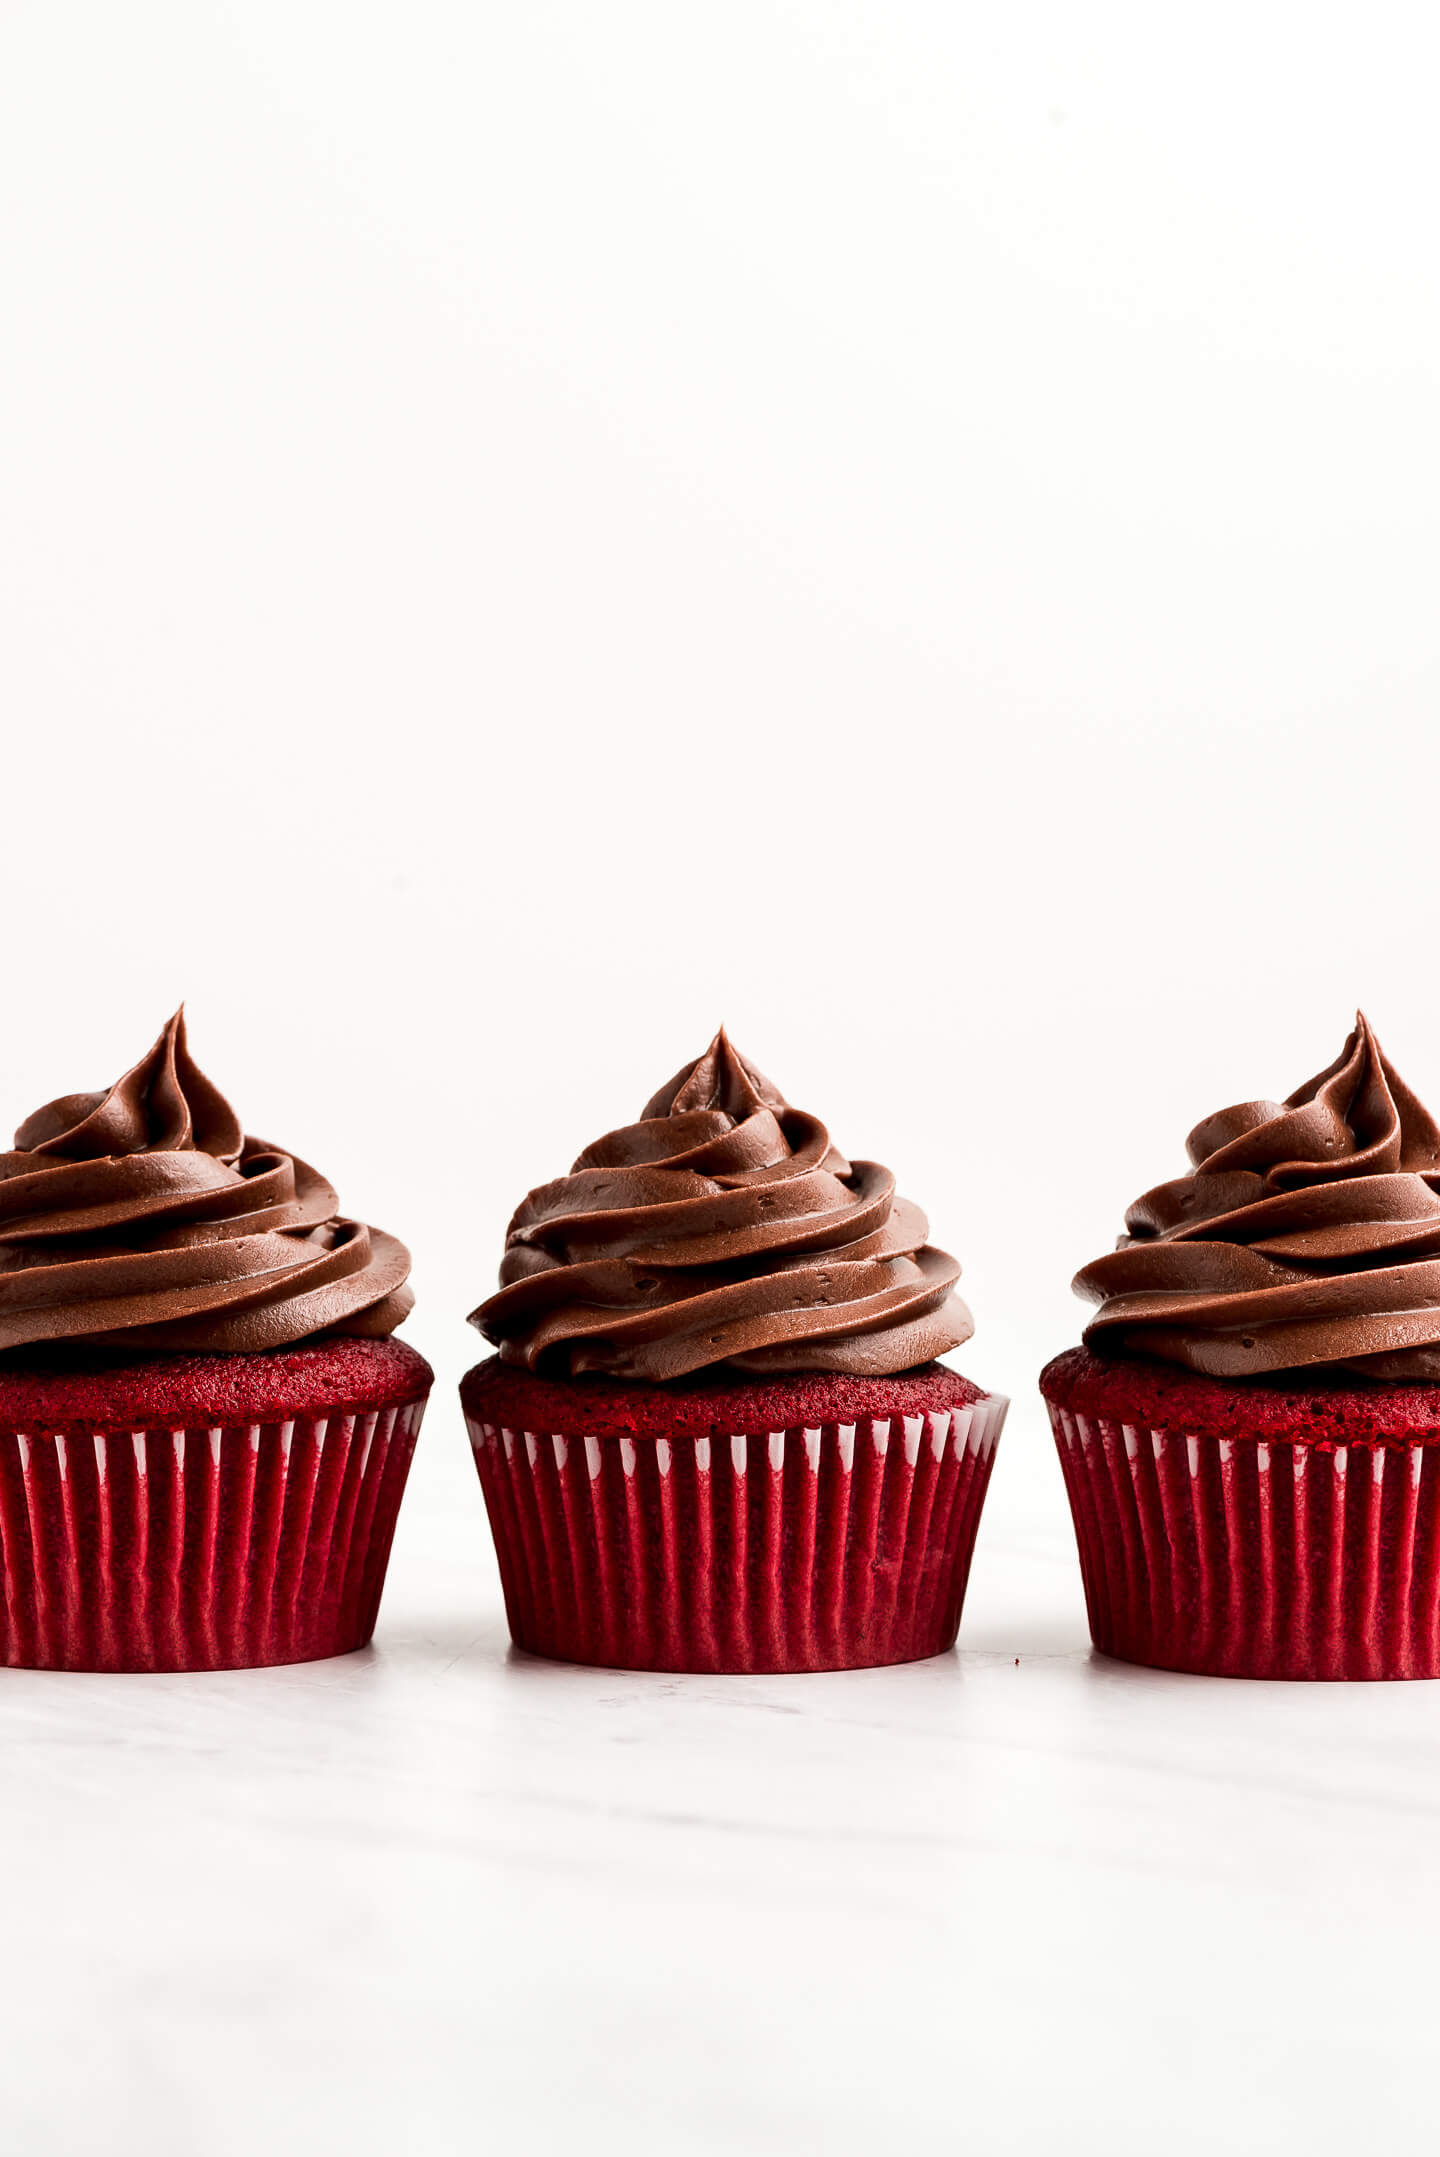 Three Red Velvet Cupcakes topped with Chocolate Cream Cheese Frosting.